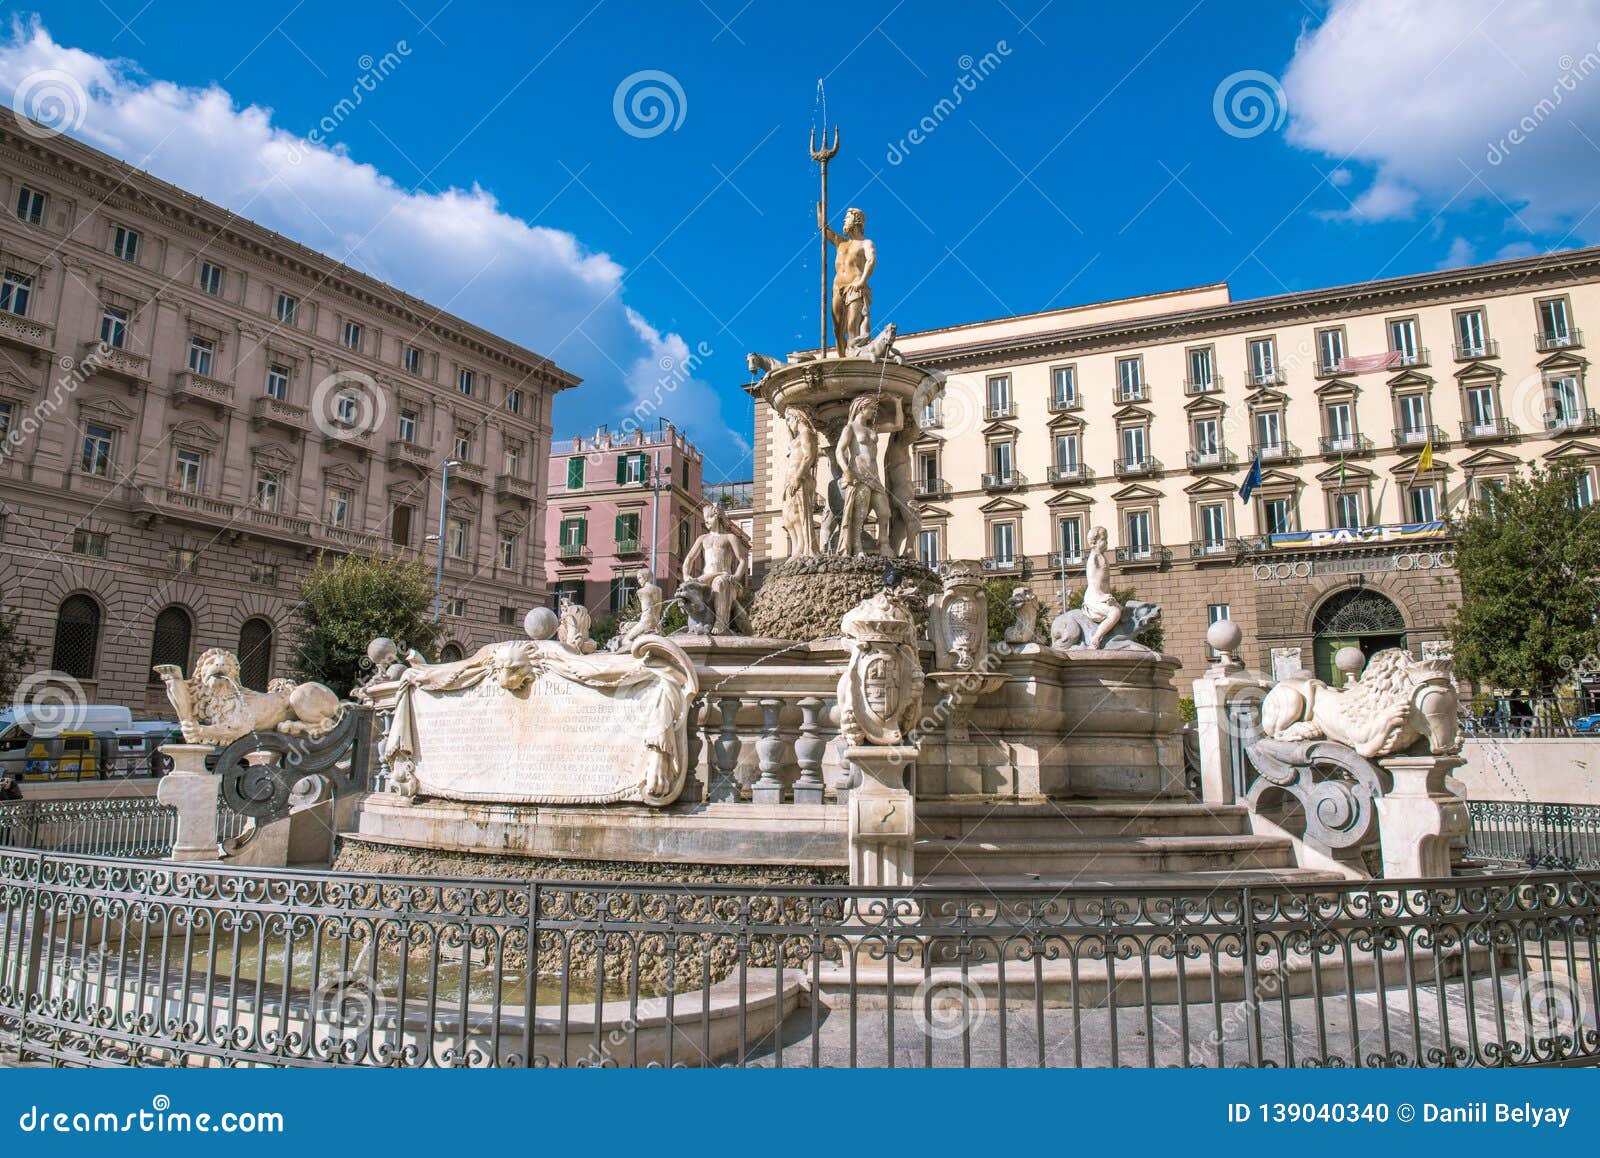 city hall square with the famous neptune fountain on piazza municipio in naples, italy.